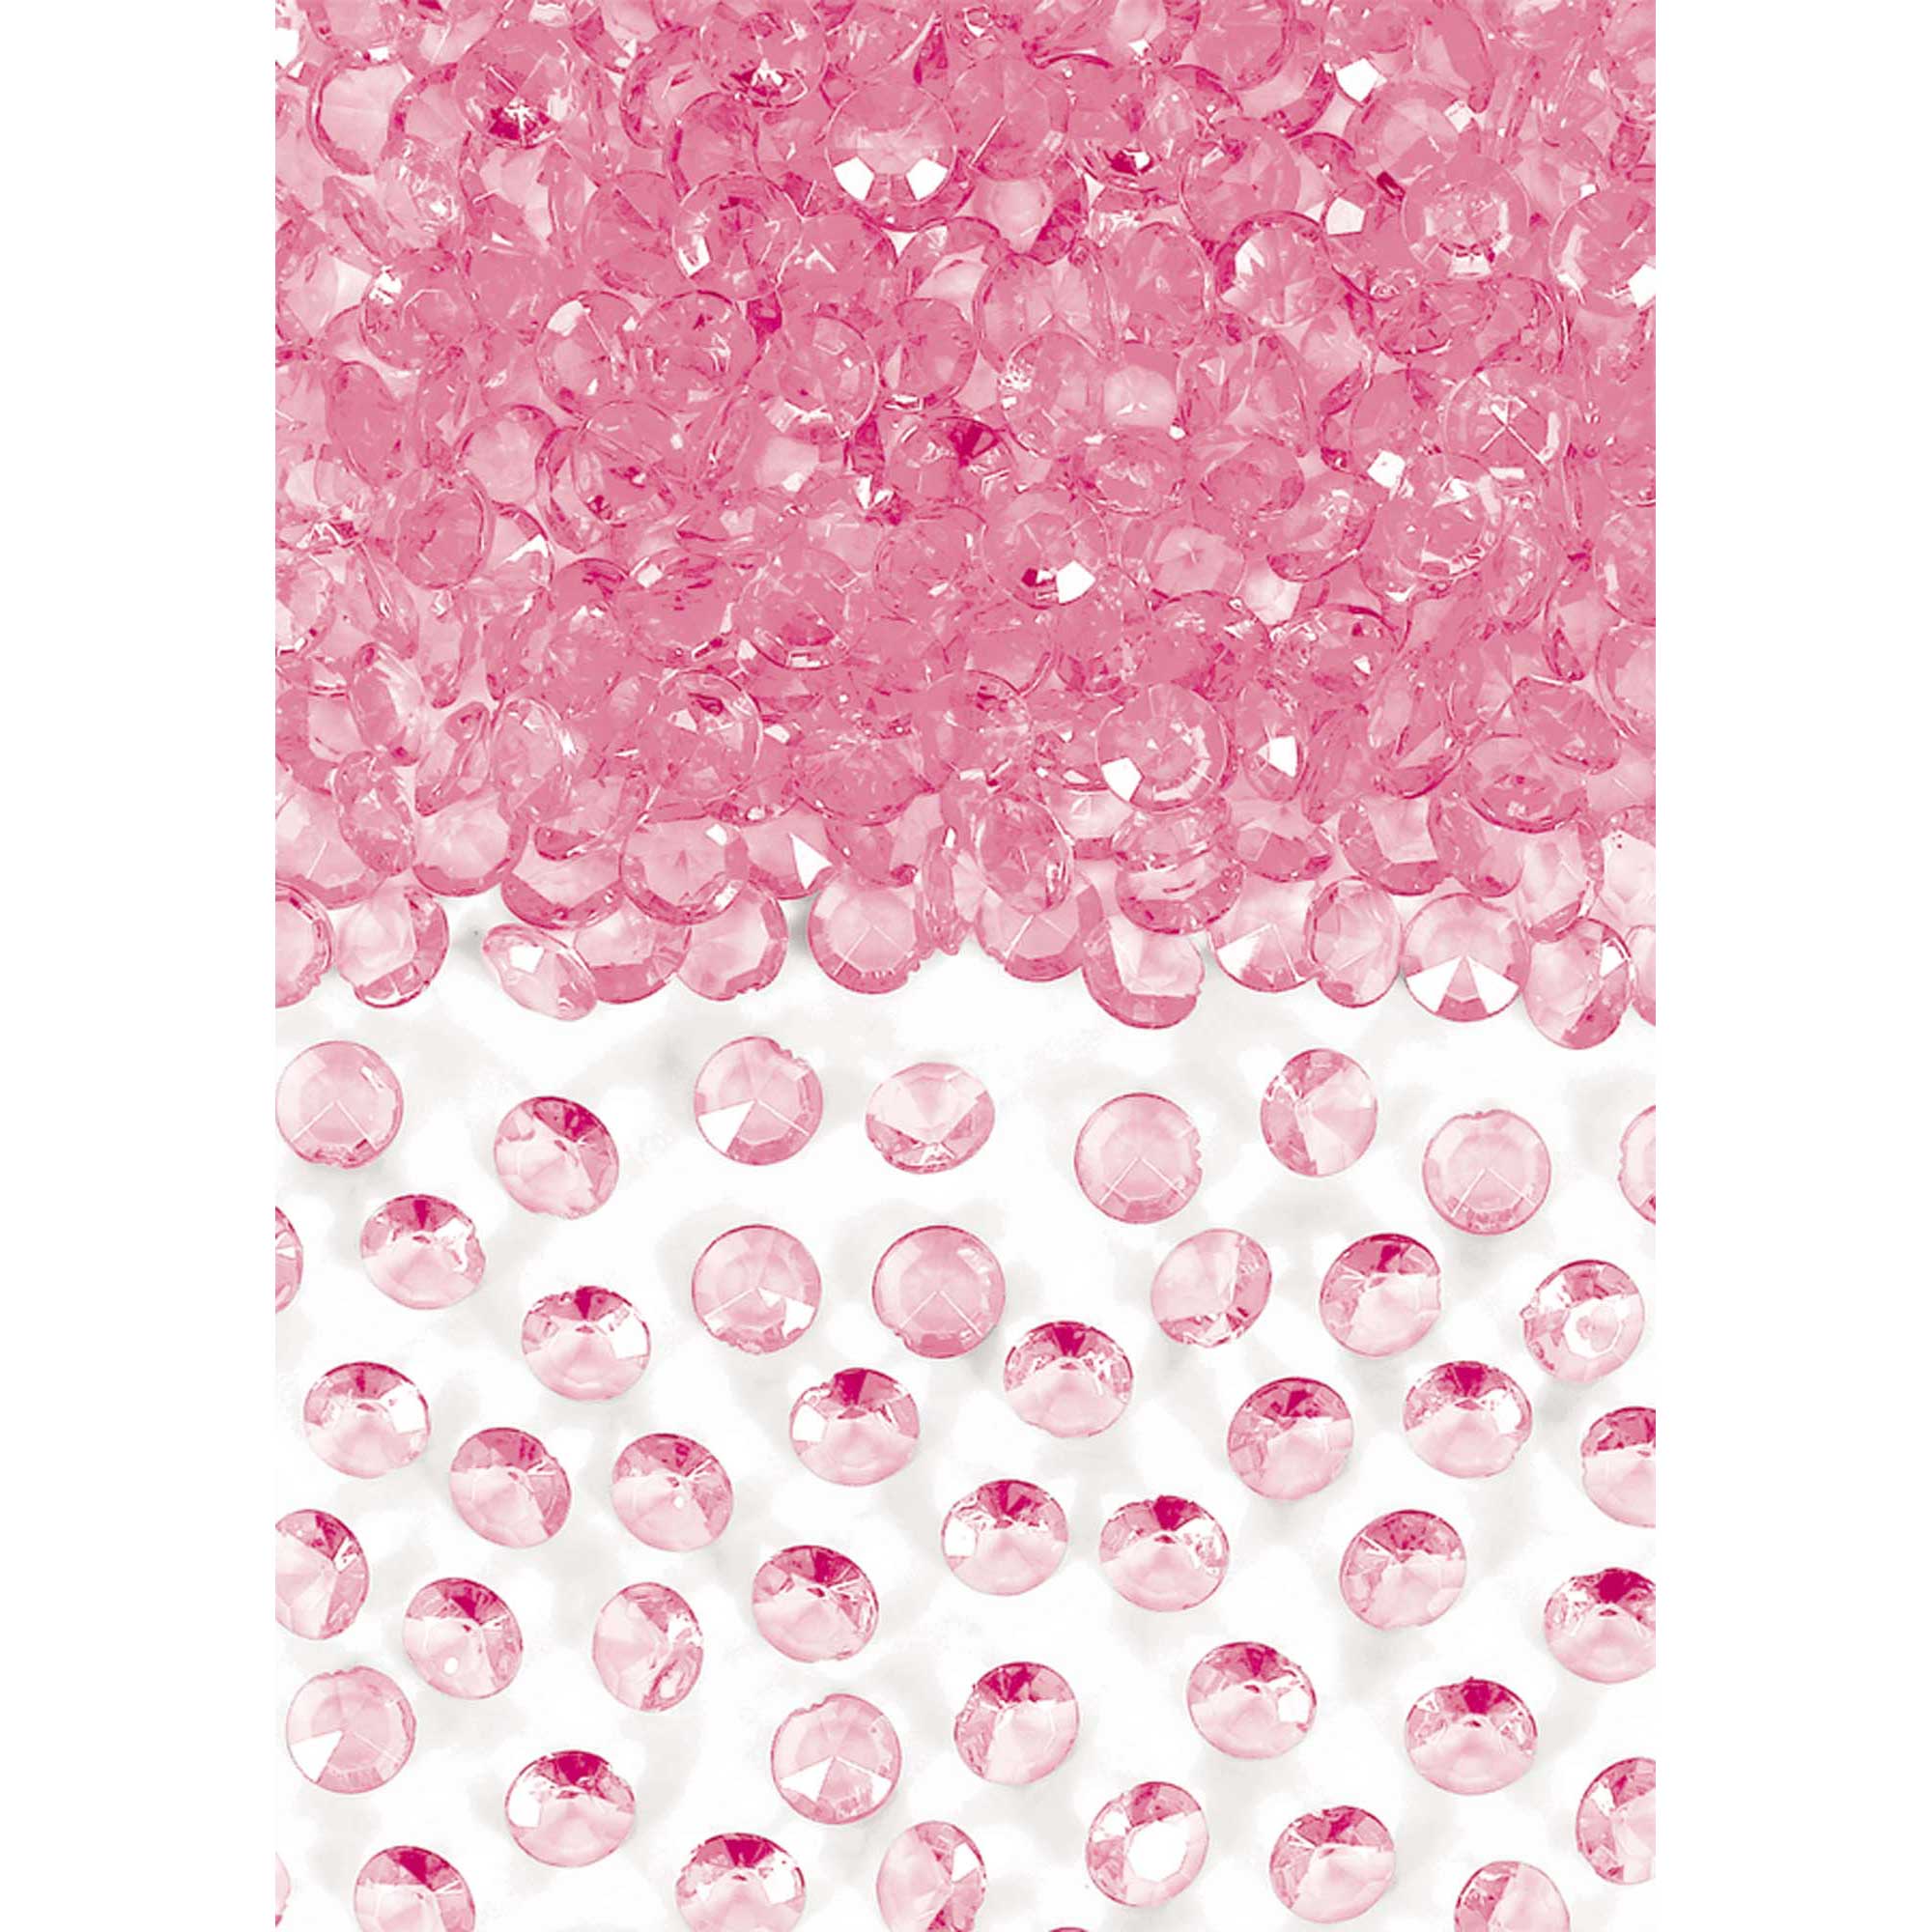 New Pink Confetti Gems 1oz - Party Centre